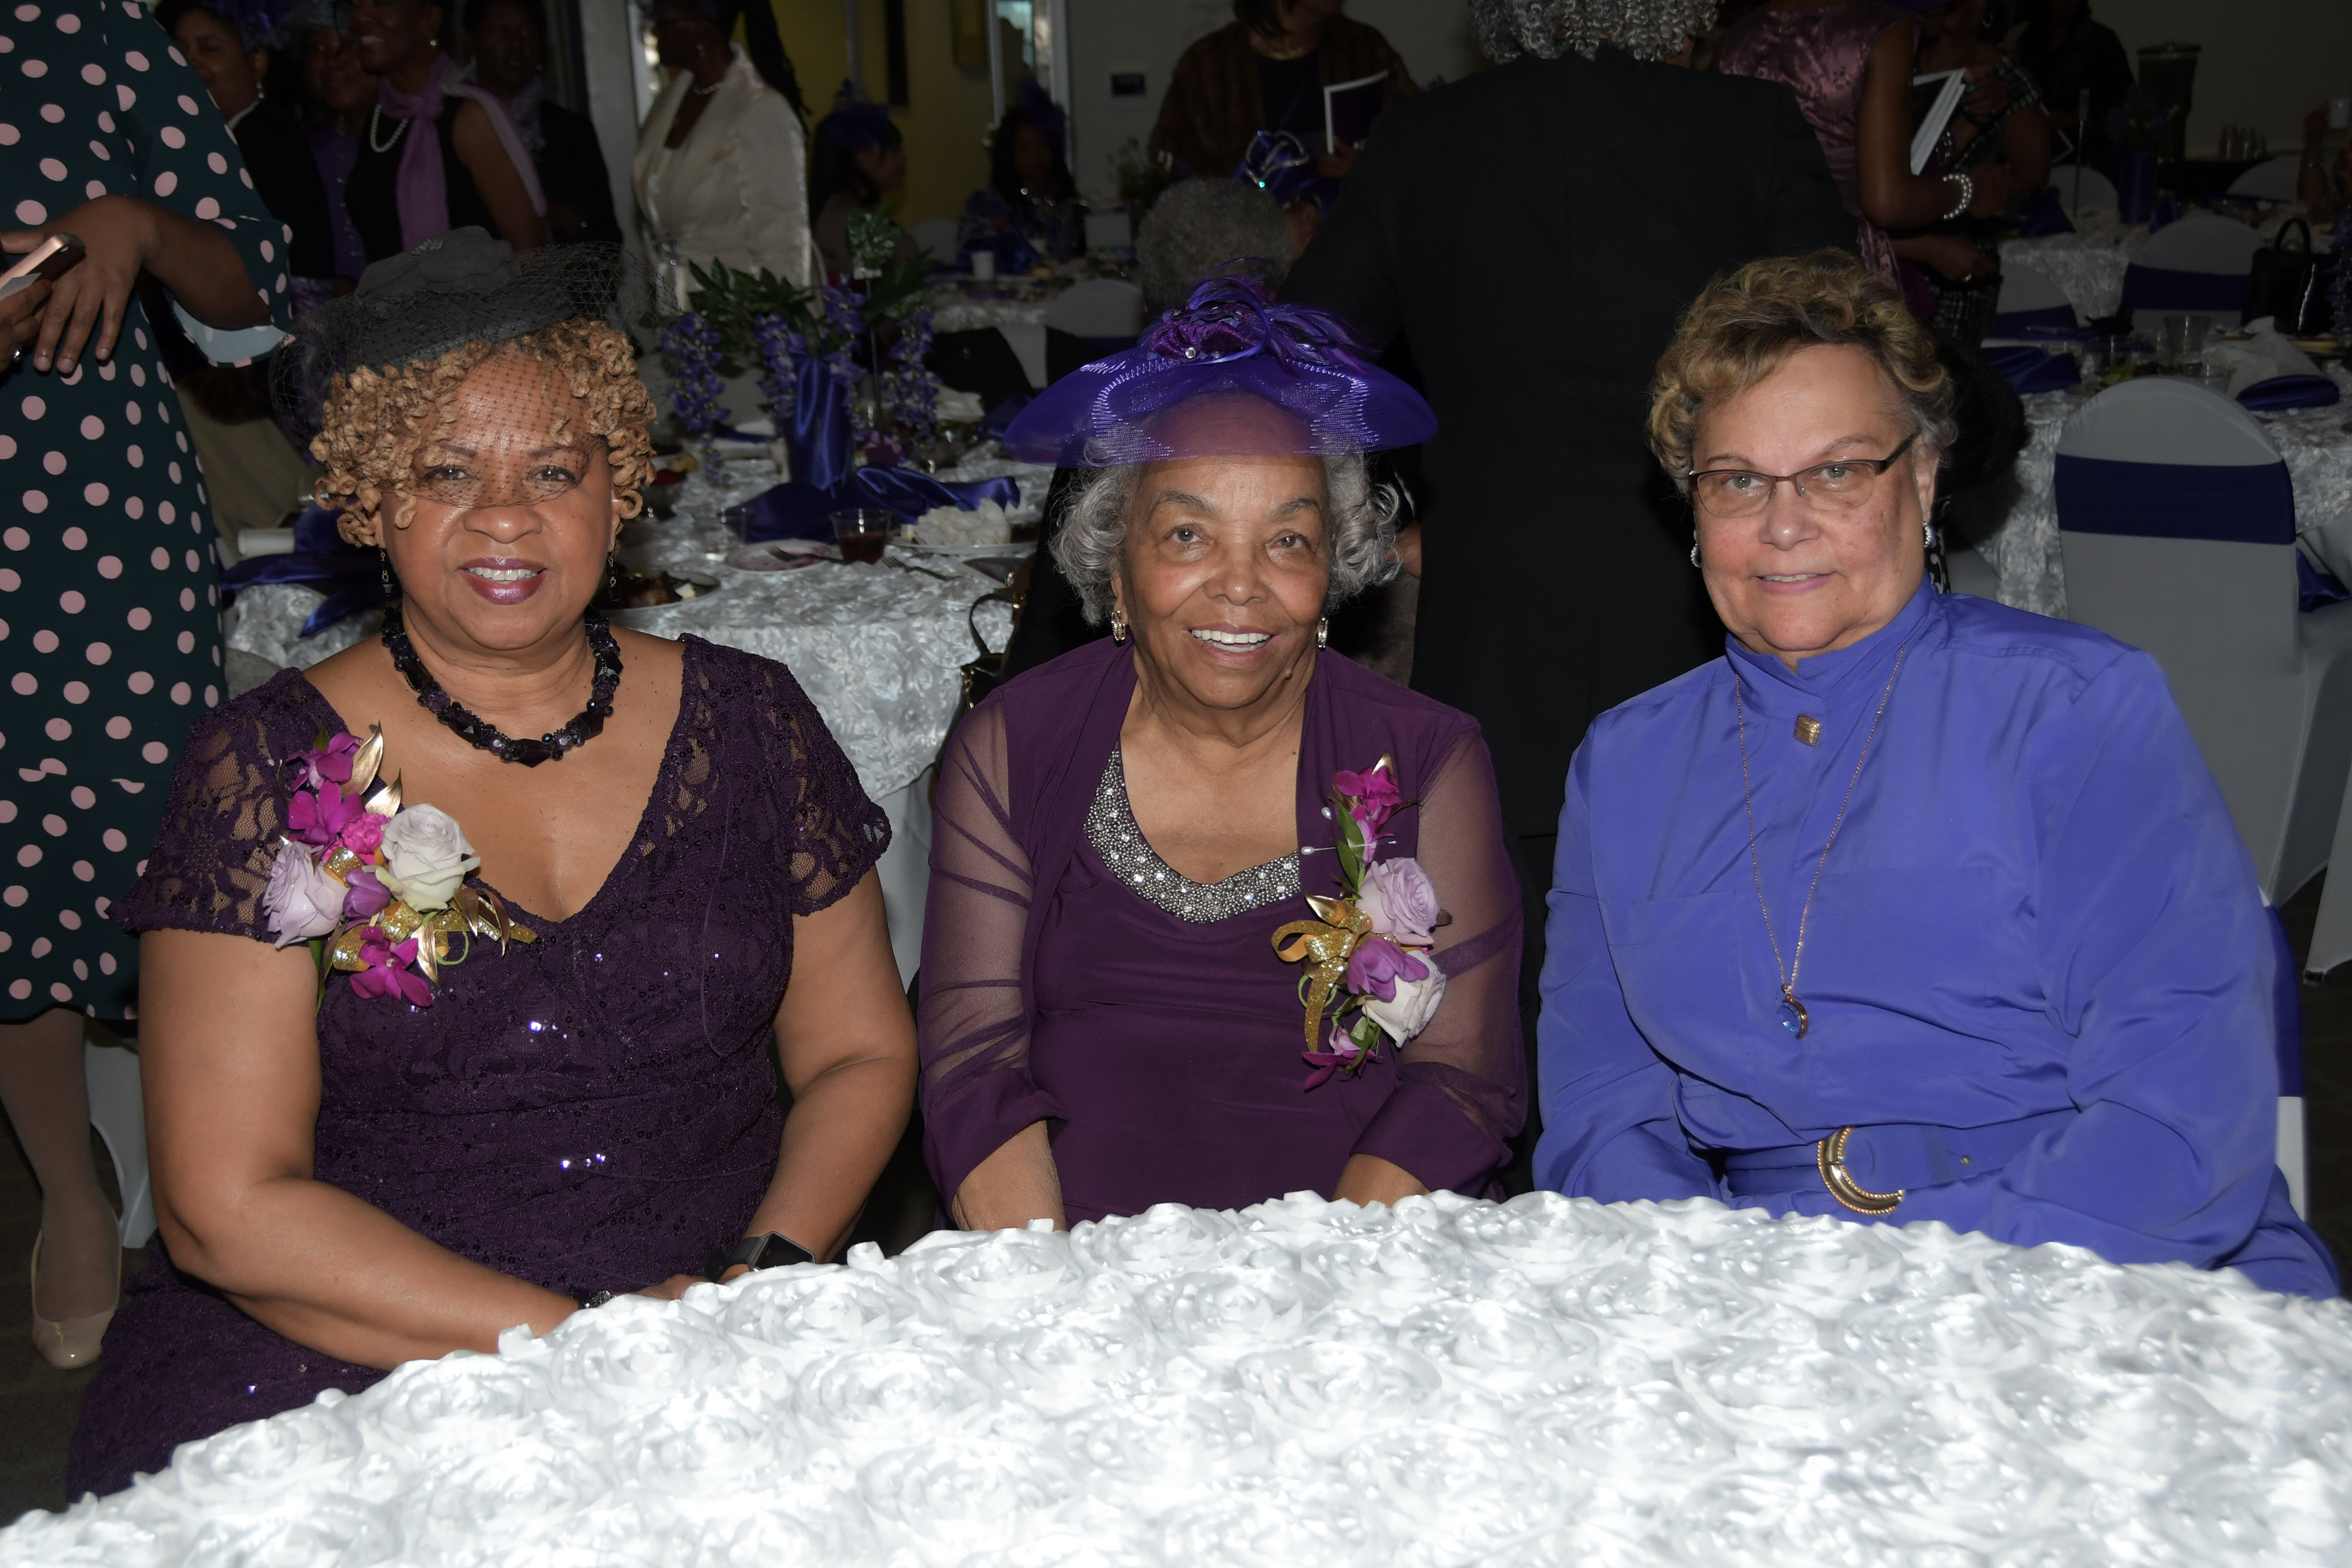 The 2019 Hats & Gloves Tea honorees: (l-r) Dr. Hanifa Shabazz, Peggy Swygert and Rev. Jean Wylie.